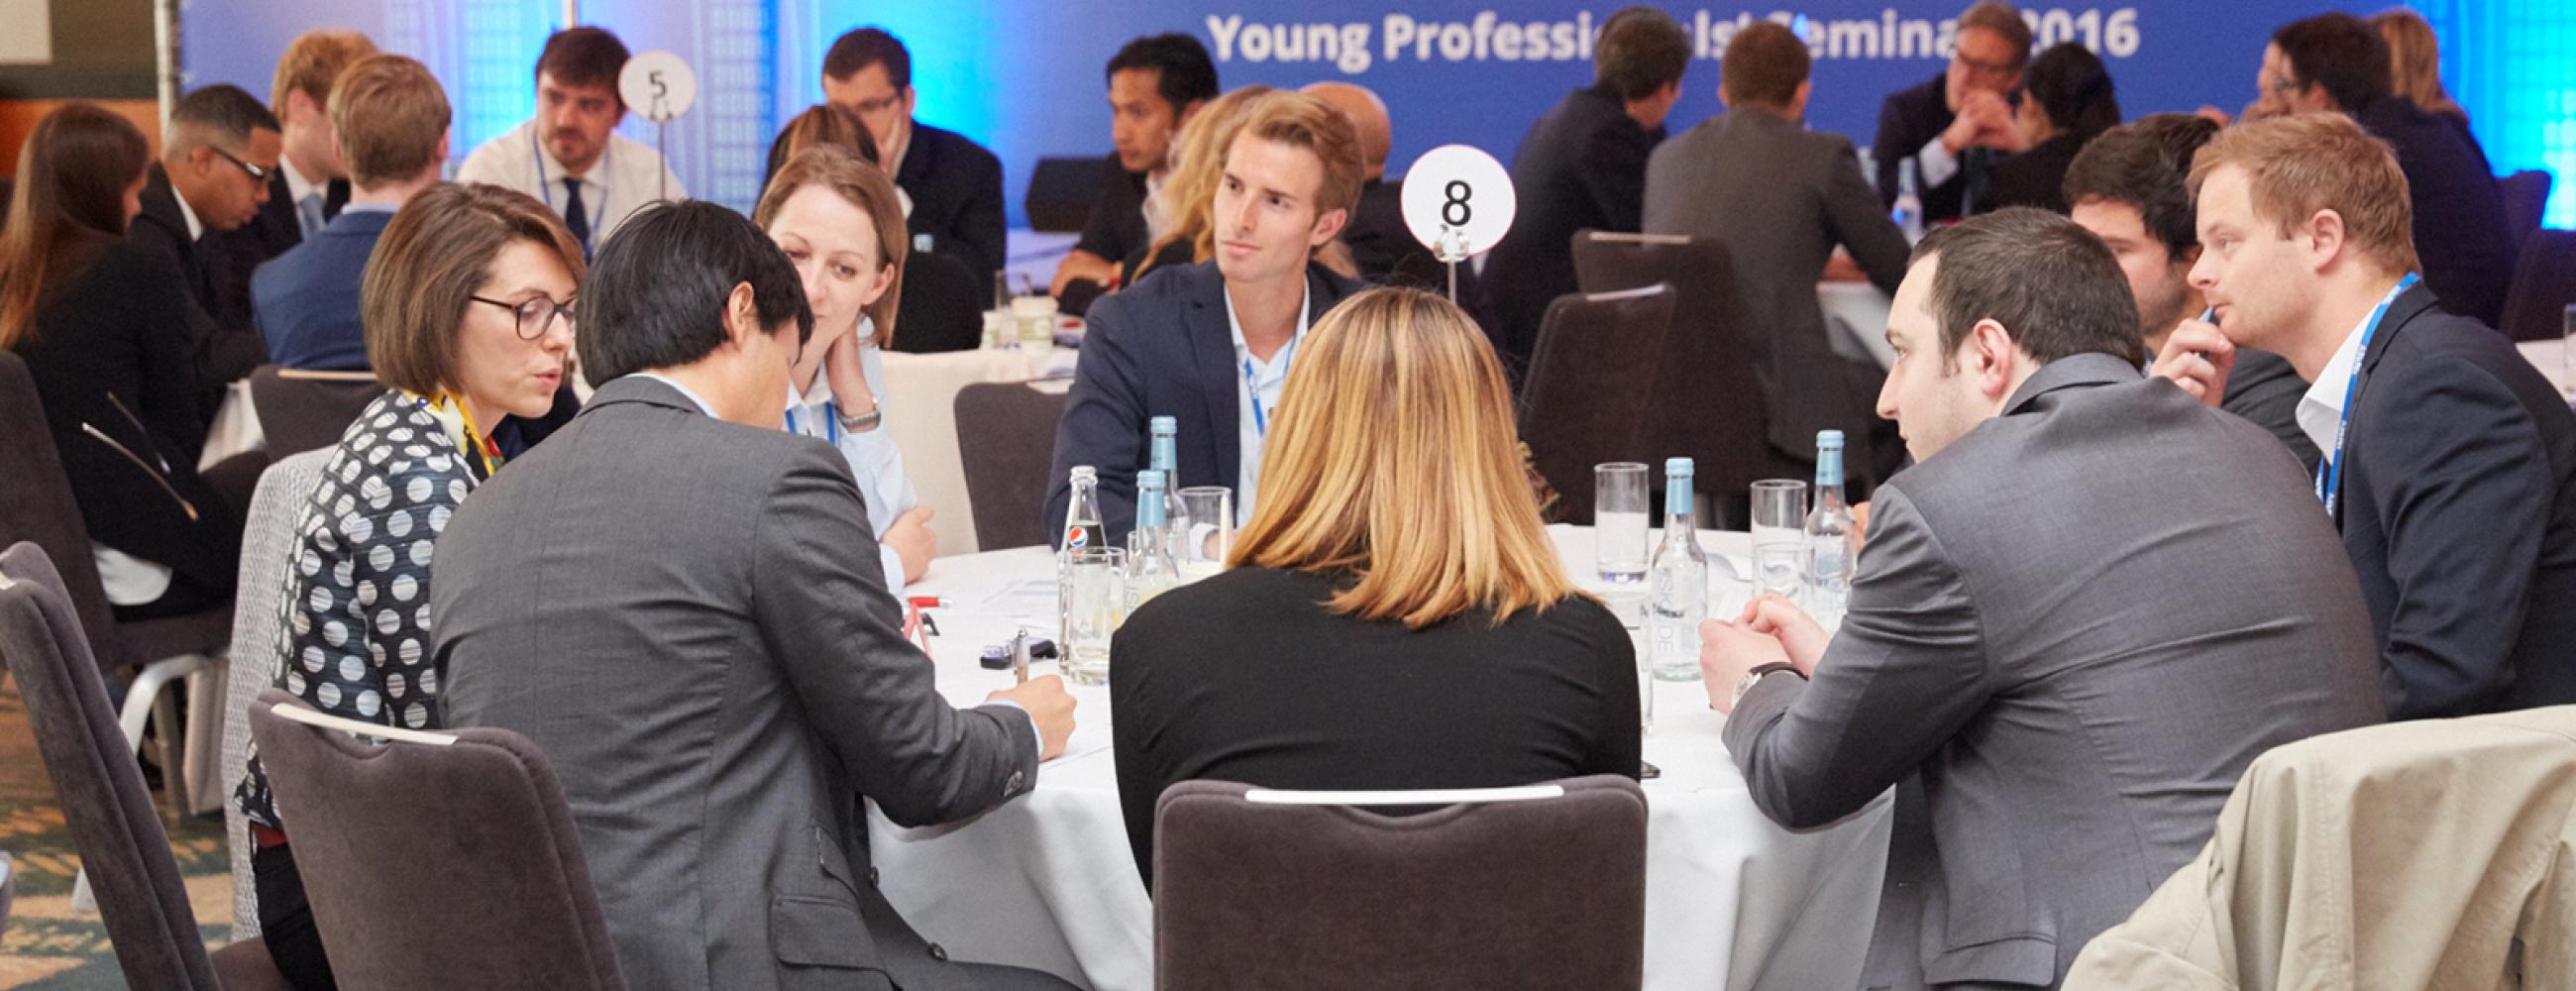 Workshop and case - Young Professionals Seminar 2016